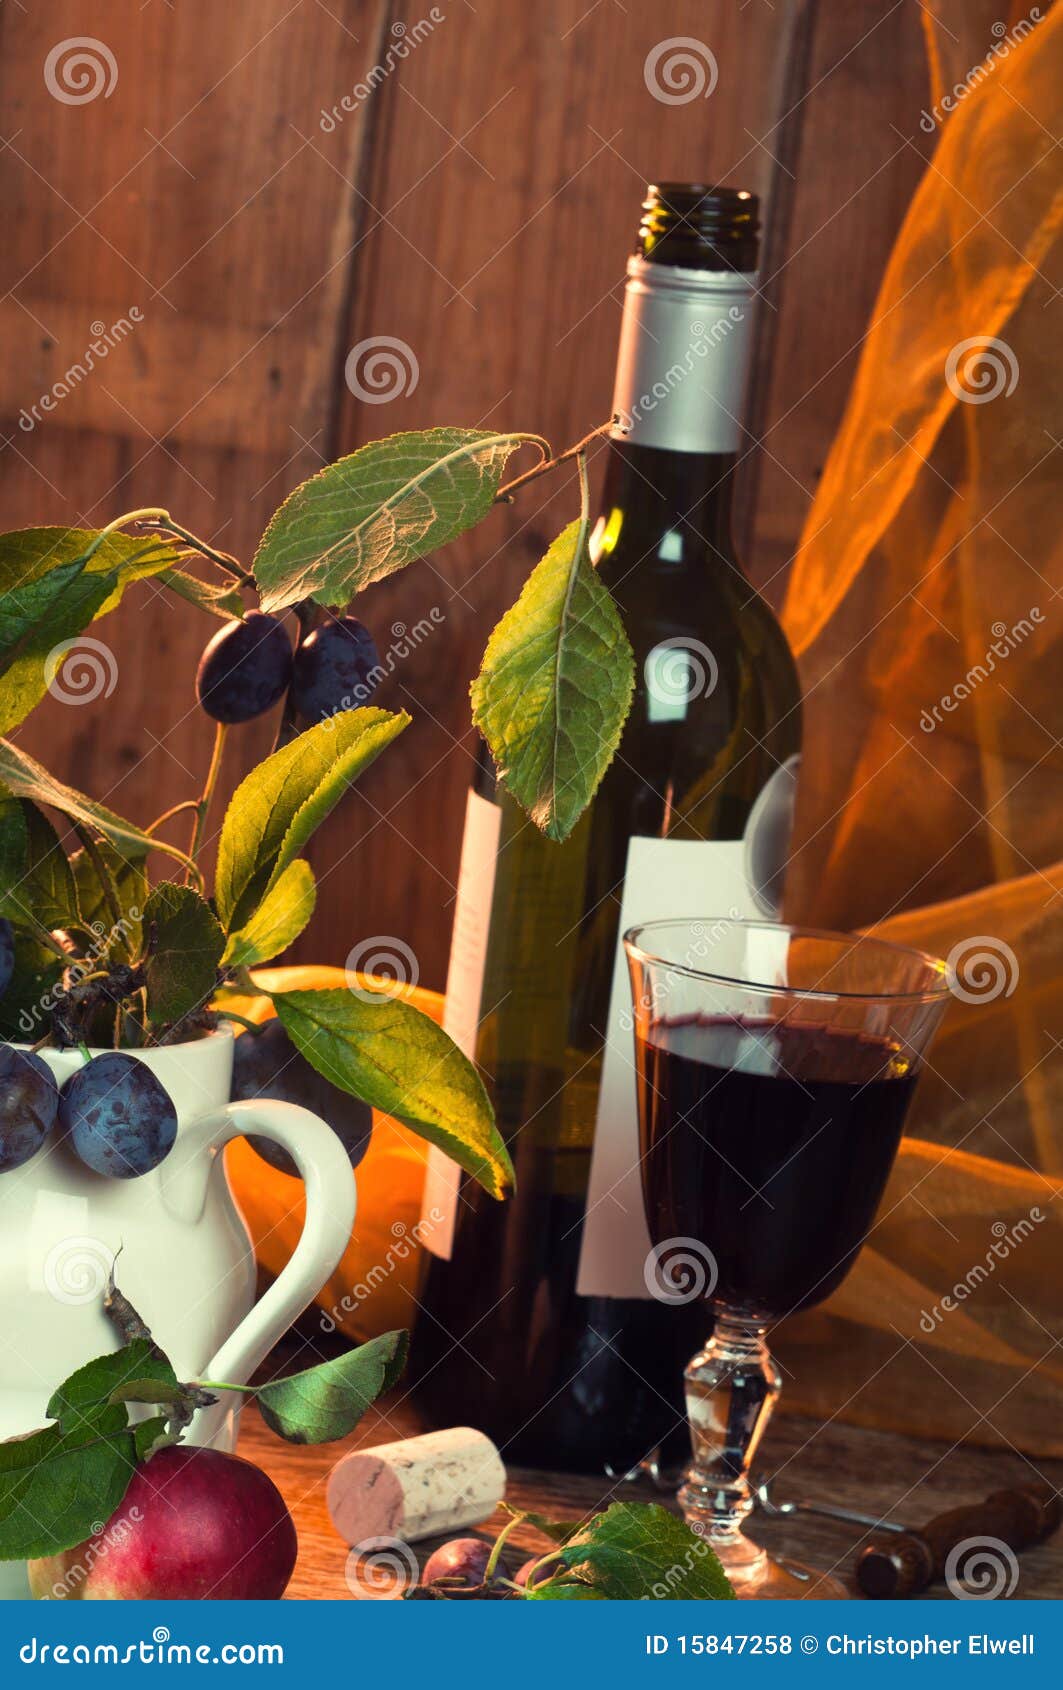 Rustic Red Wine stock photo. Image of corkscrew, fruits - 15847258